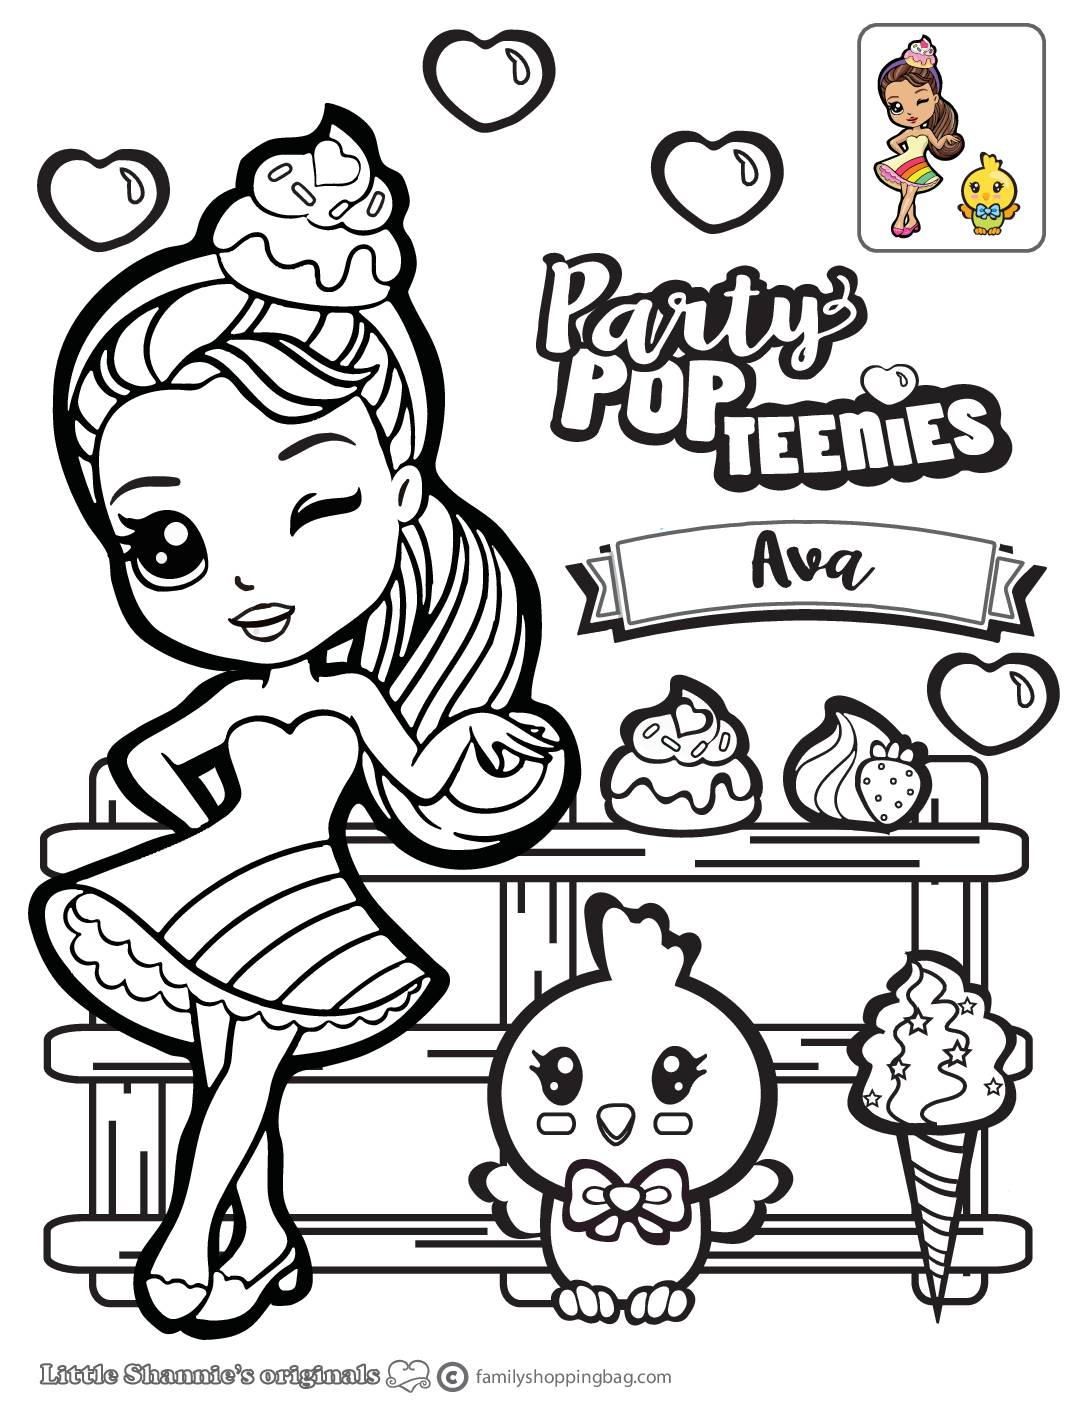 Ava Coloring Page Party Pop Teenies